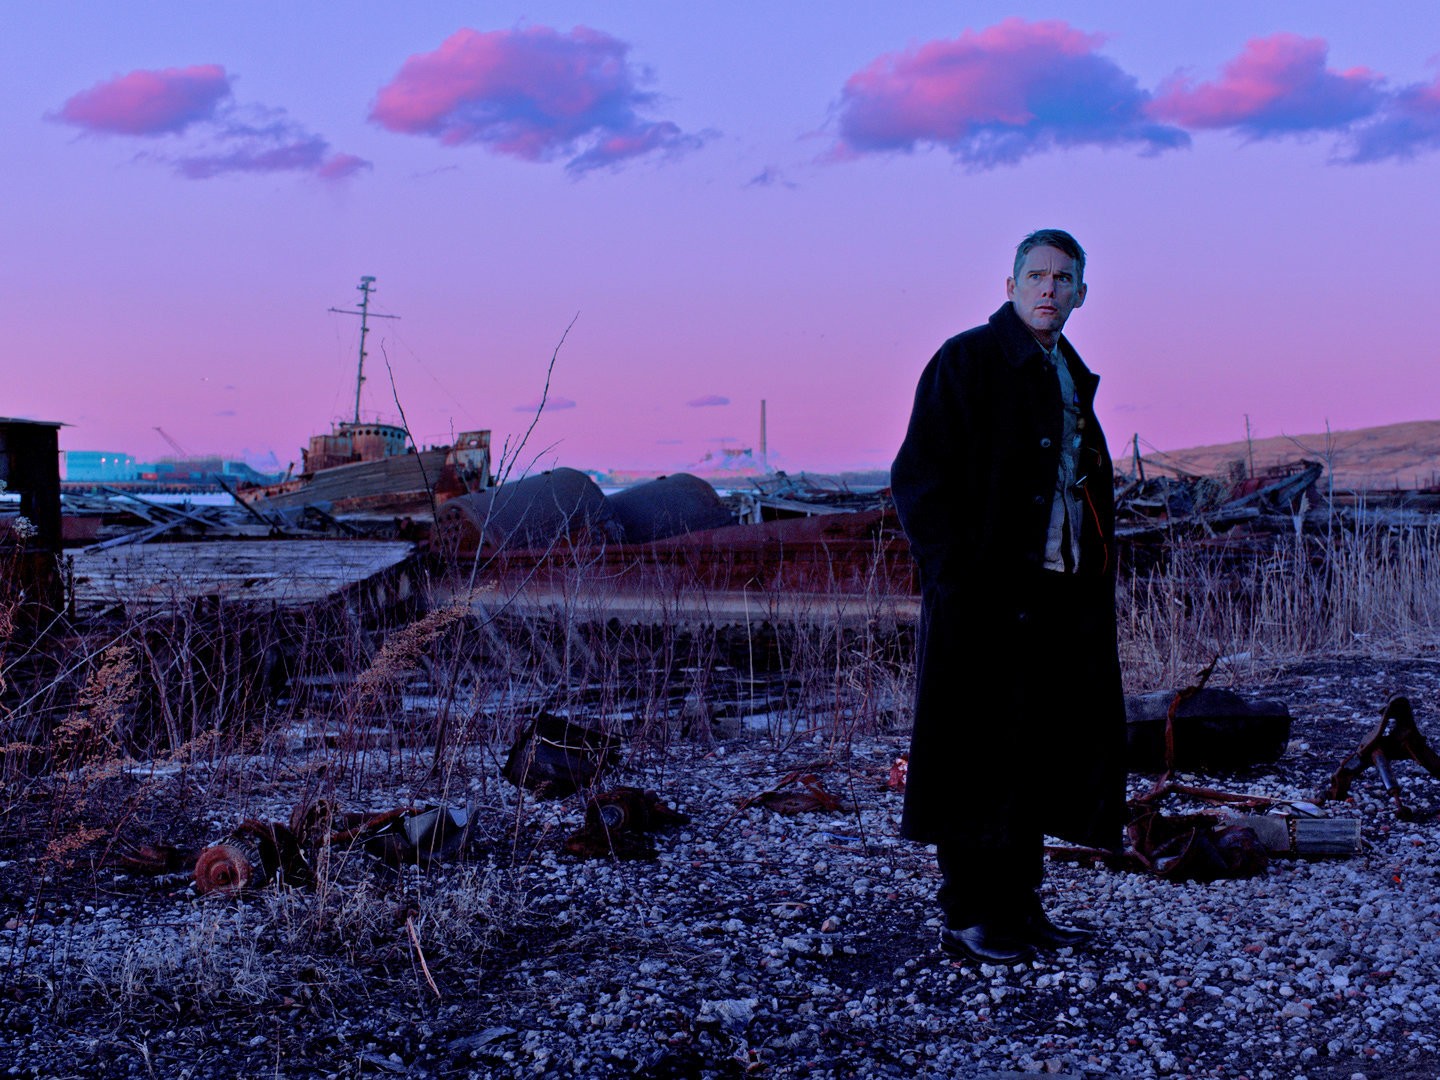 first reformed